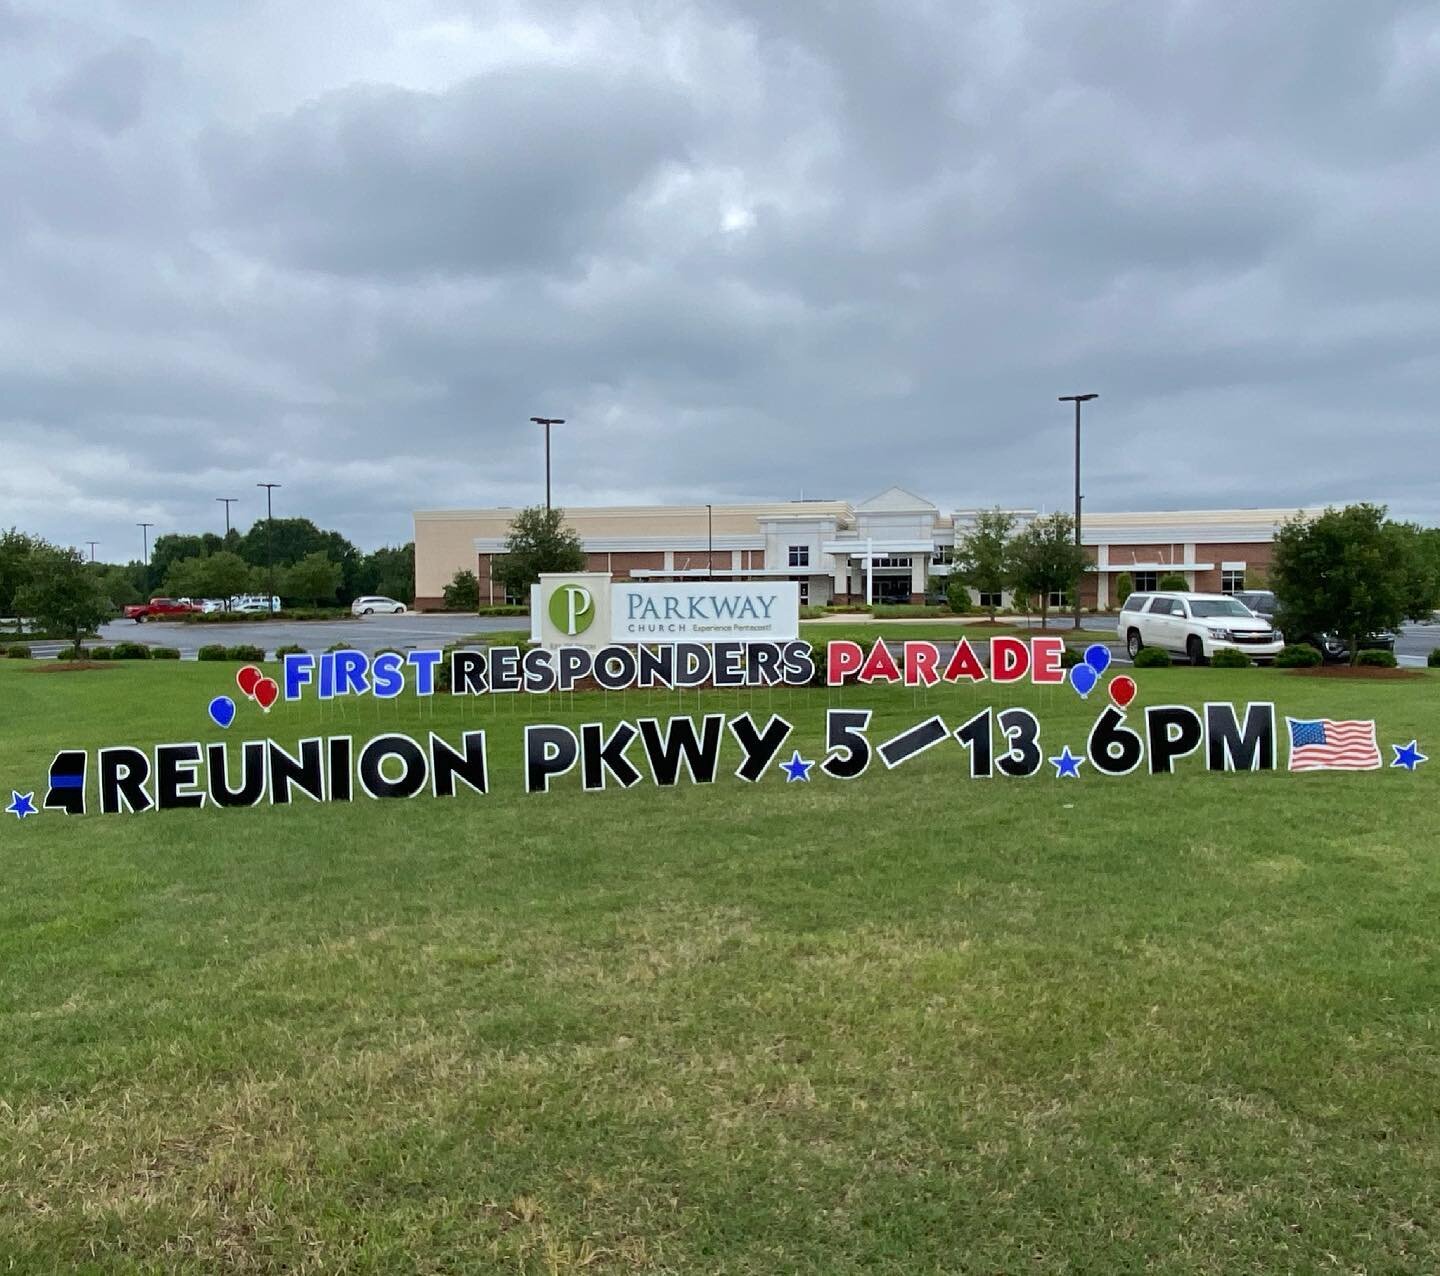 ⭐️First Responders Parade!  TODAY!  REUNION PARKWAY!  6PM!⭐️